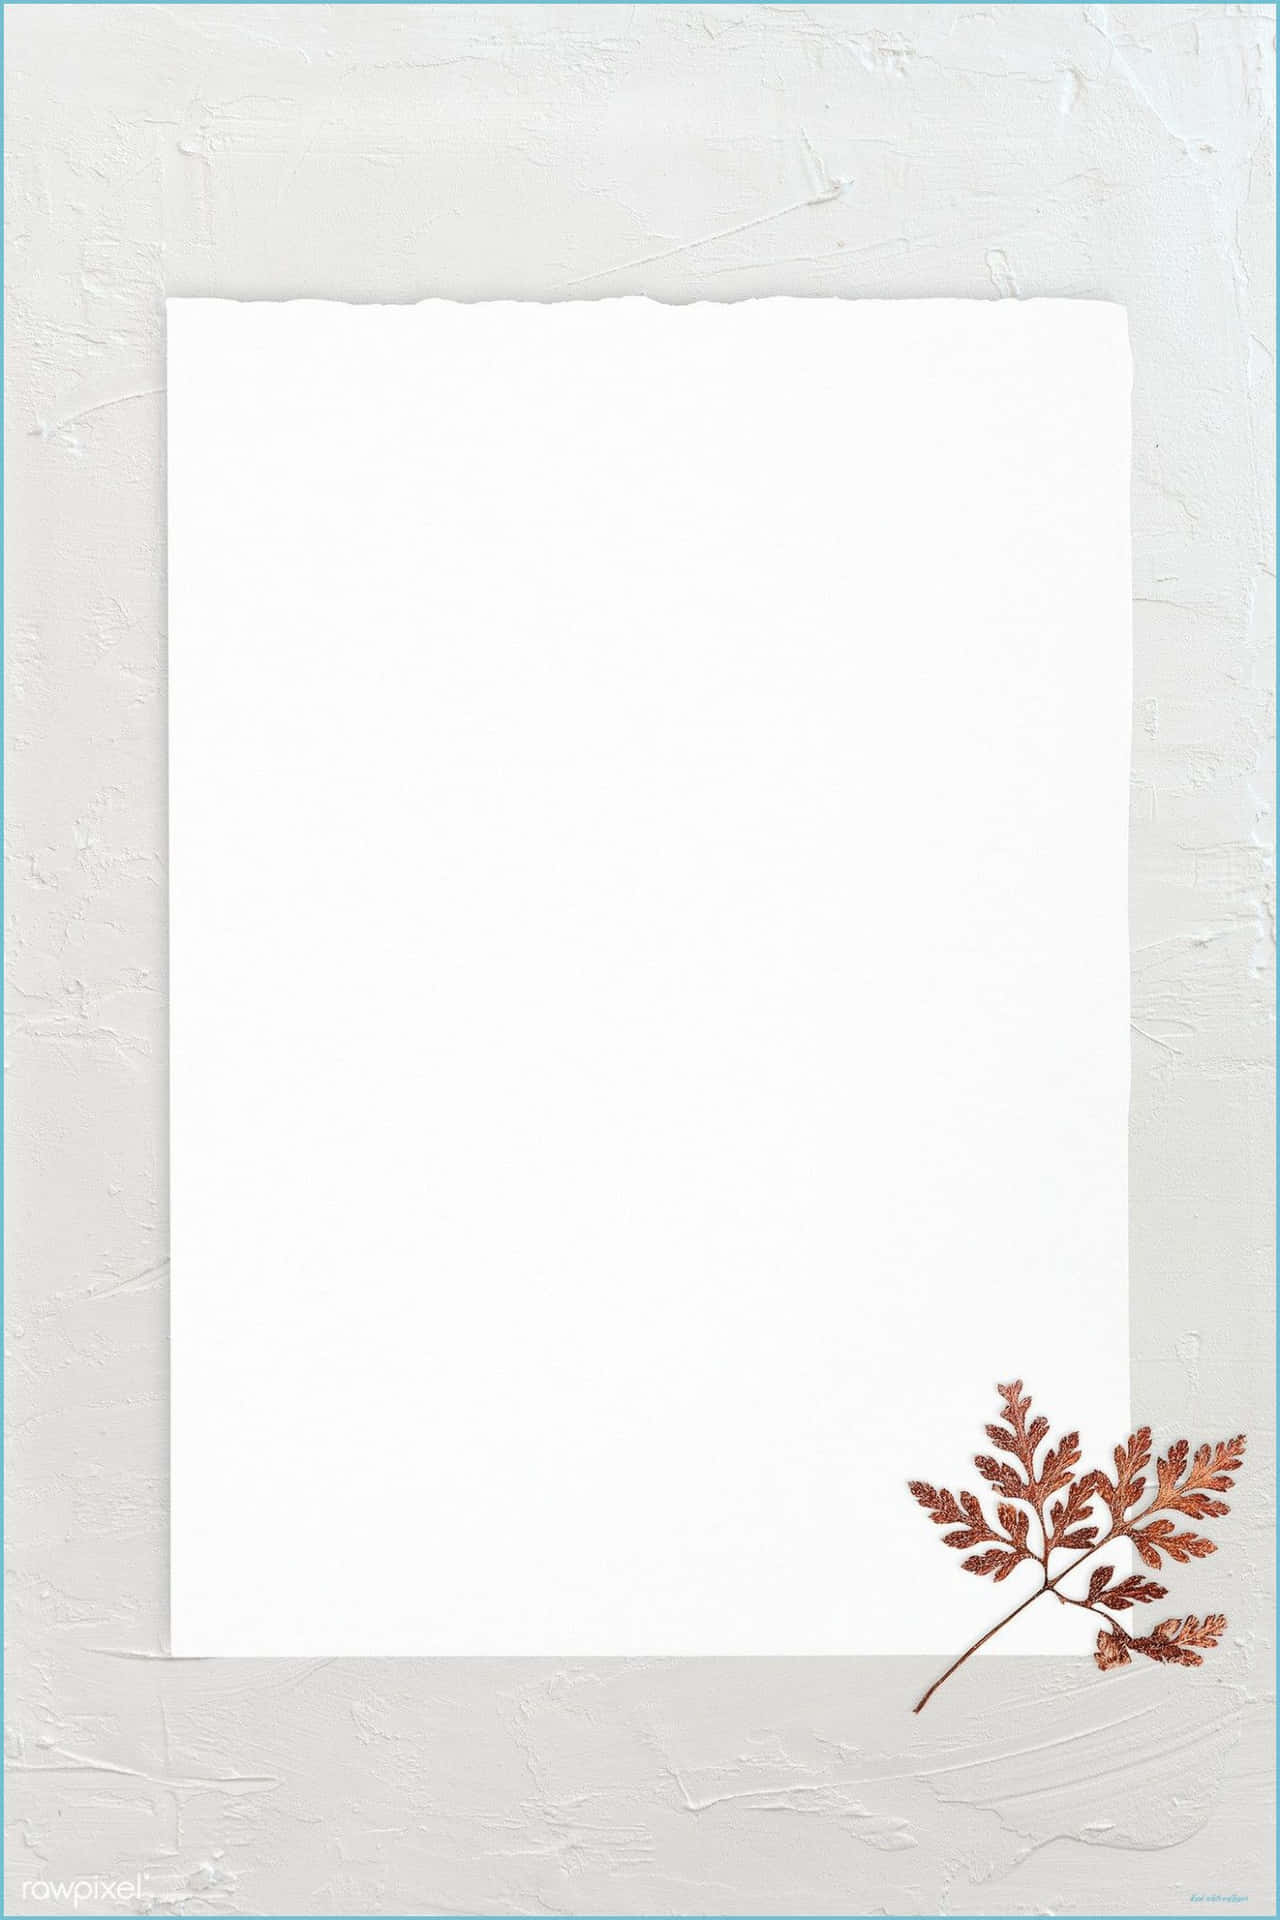 A White Paper With A Leaf On It